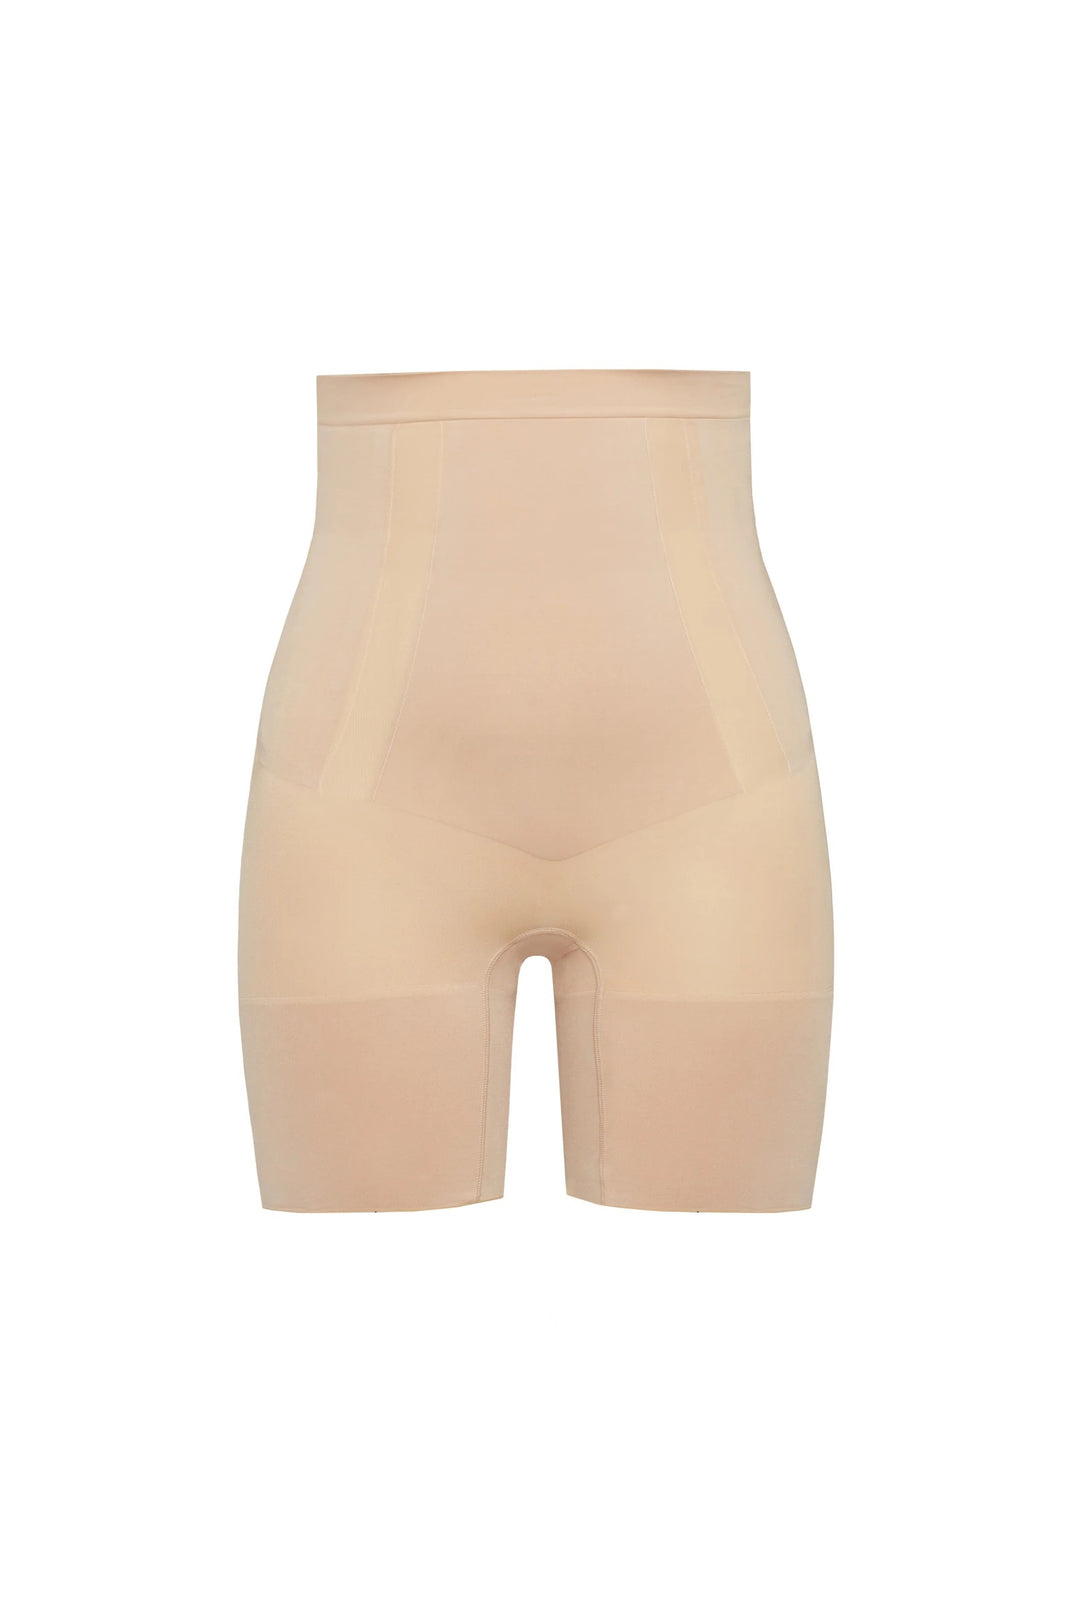 Spanx Power Short - Soft Nude – All Inspired Boutiques